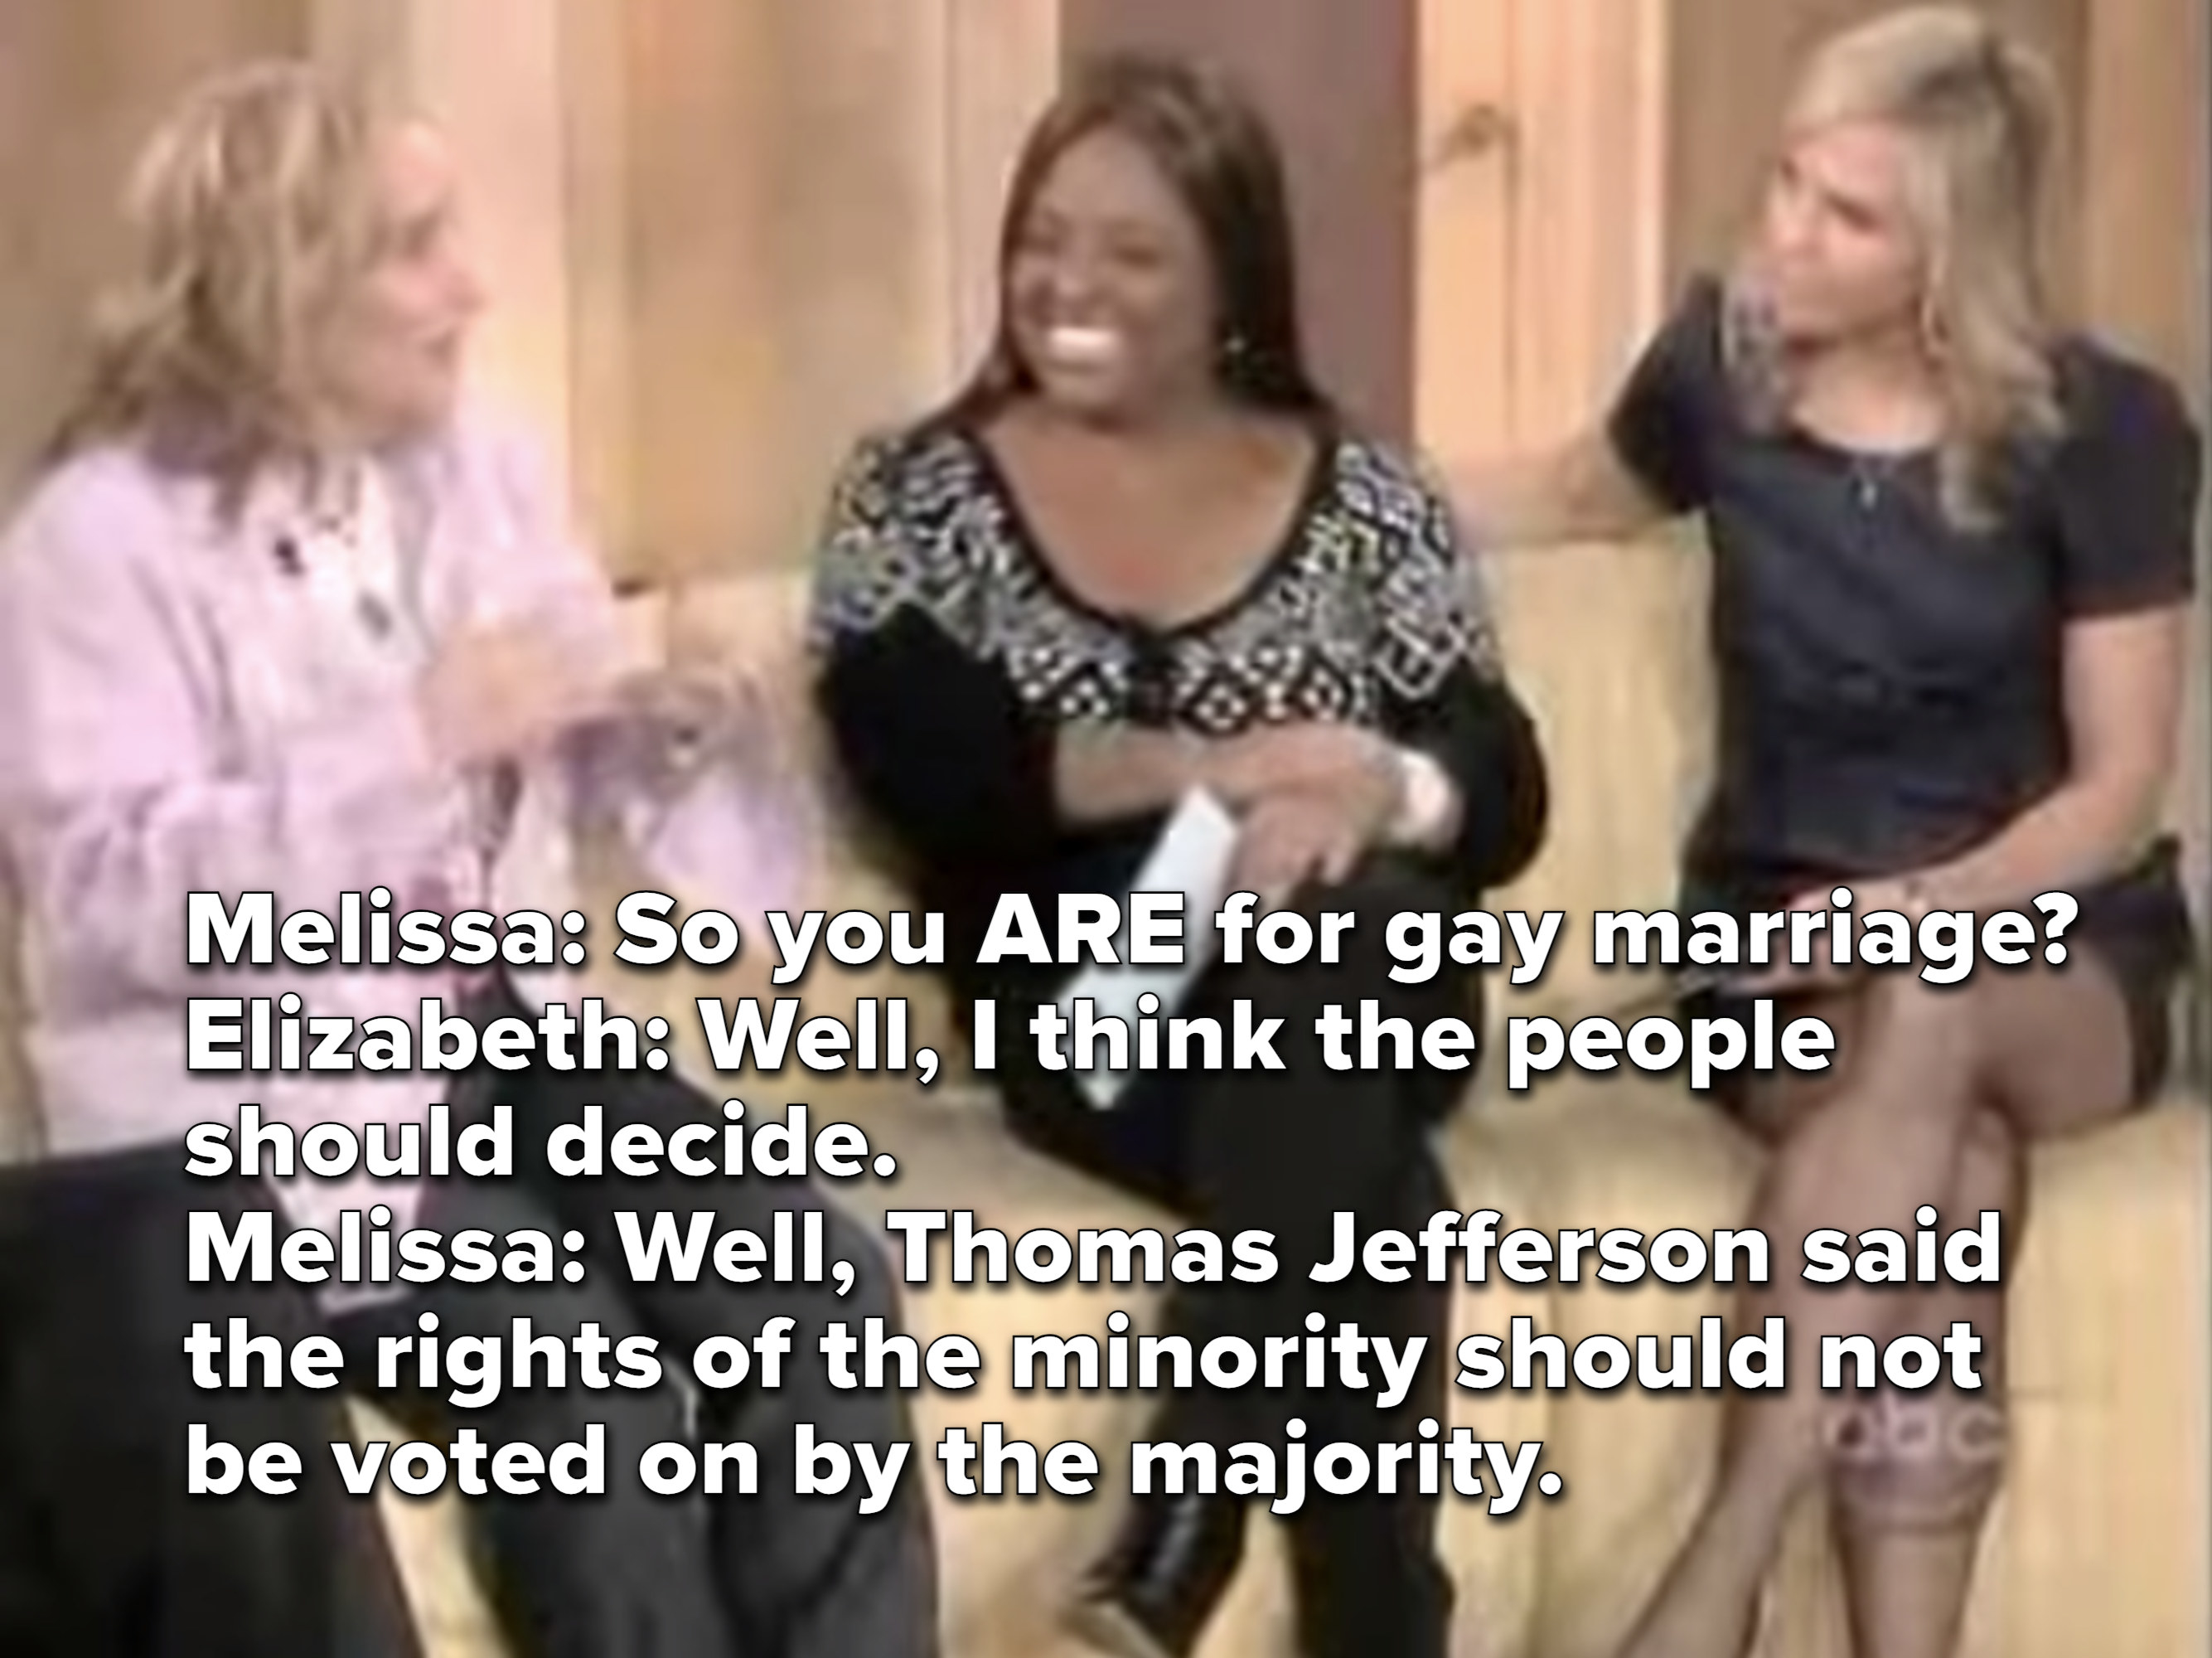 melissa saying, well, thomas jefferson said the rights of the minority should not be voted on by the majority